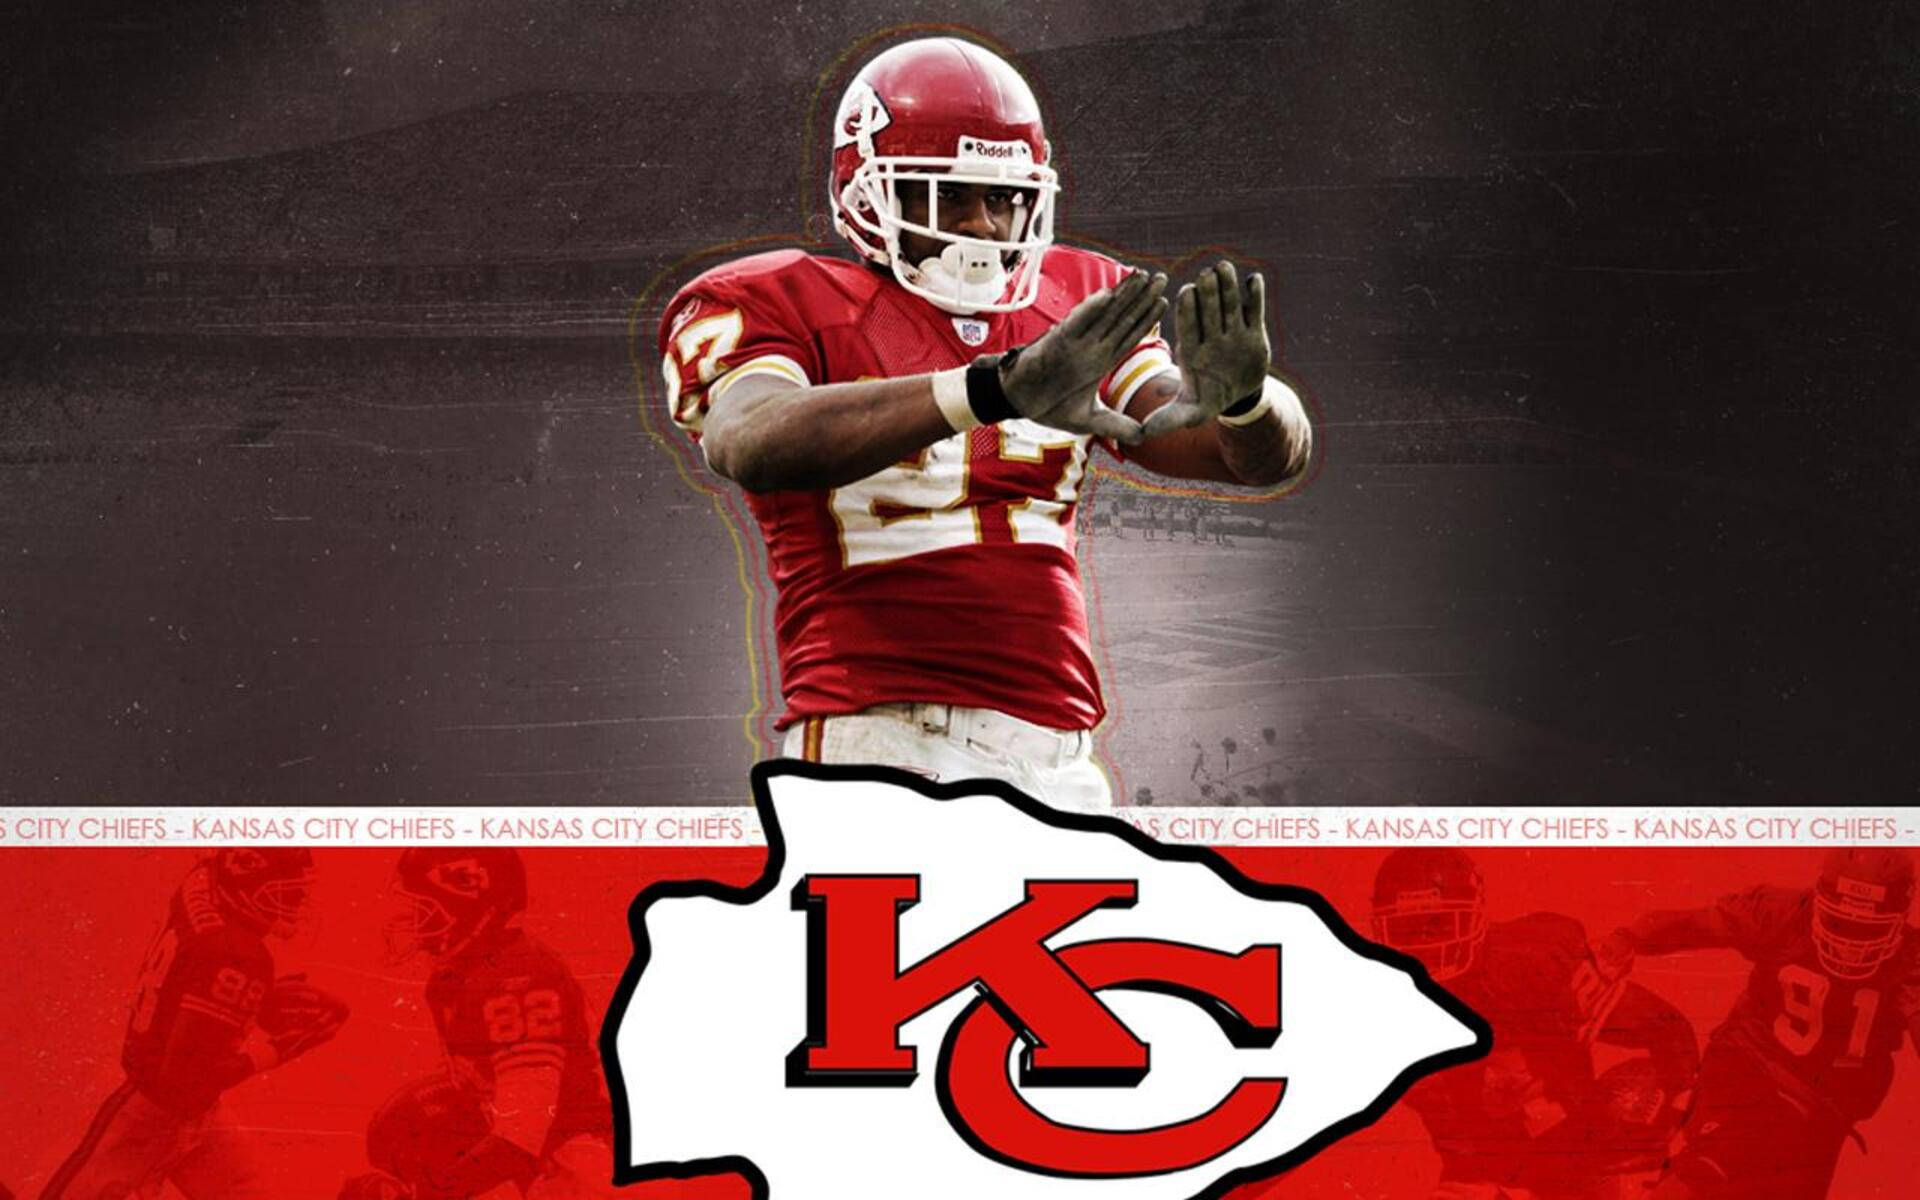 Kansas City Chiefs show their cool in a colorful display Wallpaper